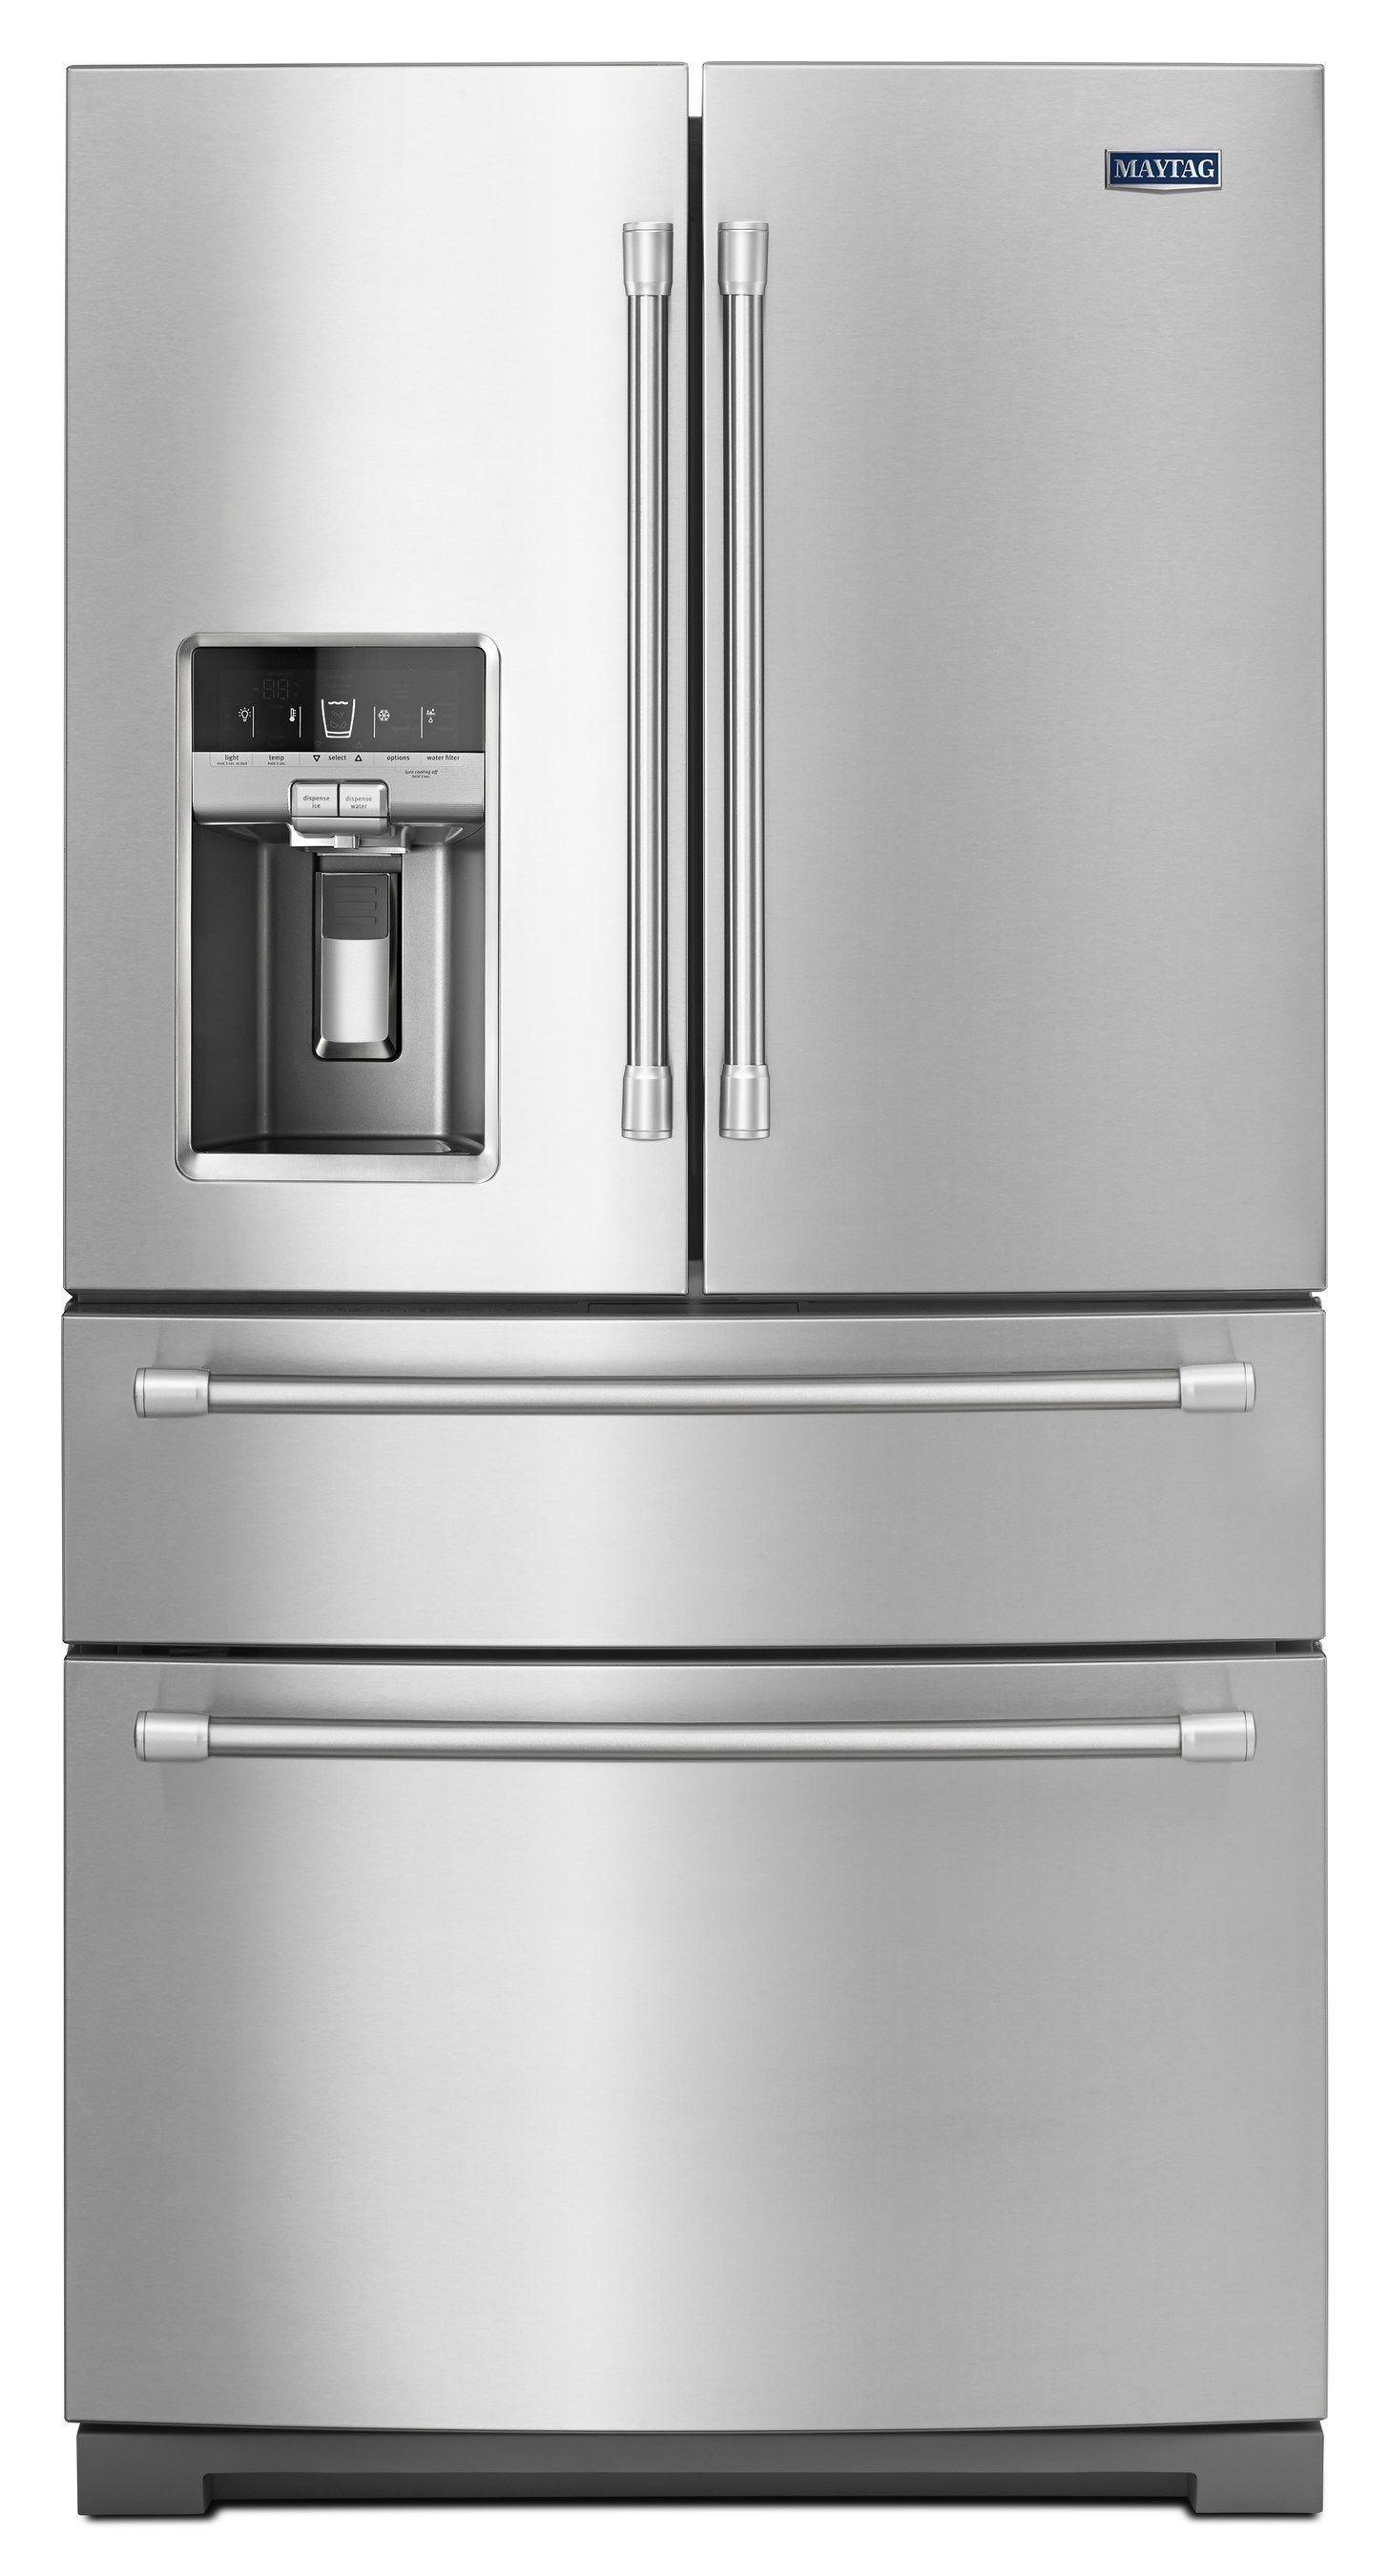 Maytag Refrigeration Logo - New Maytag® Refrigerator Built with Bold Style That's Made to Last